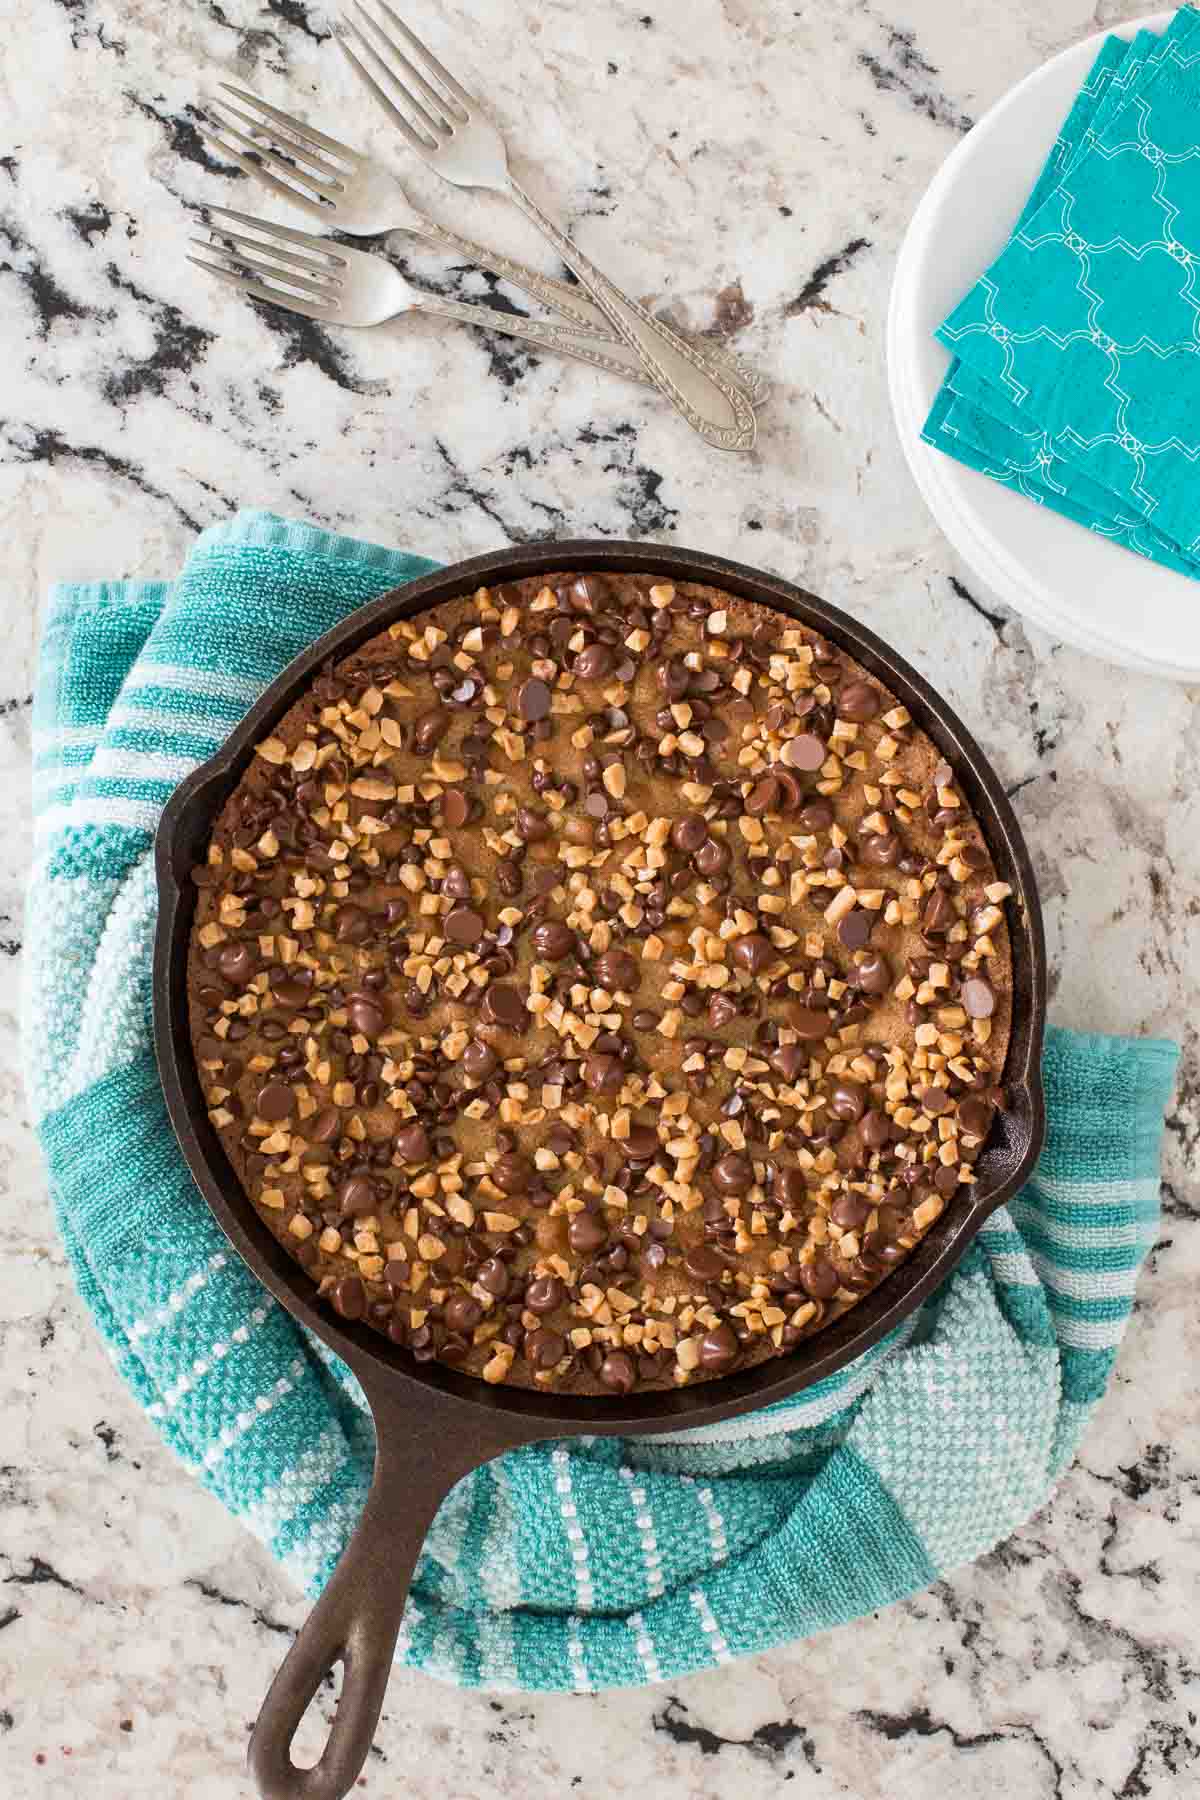 Overhead photo of a Chocolate Chip Toffee Skillet Tart nestled in a turquoise bowl on a black and white granite countertop.